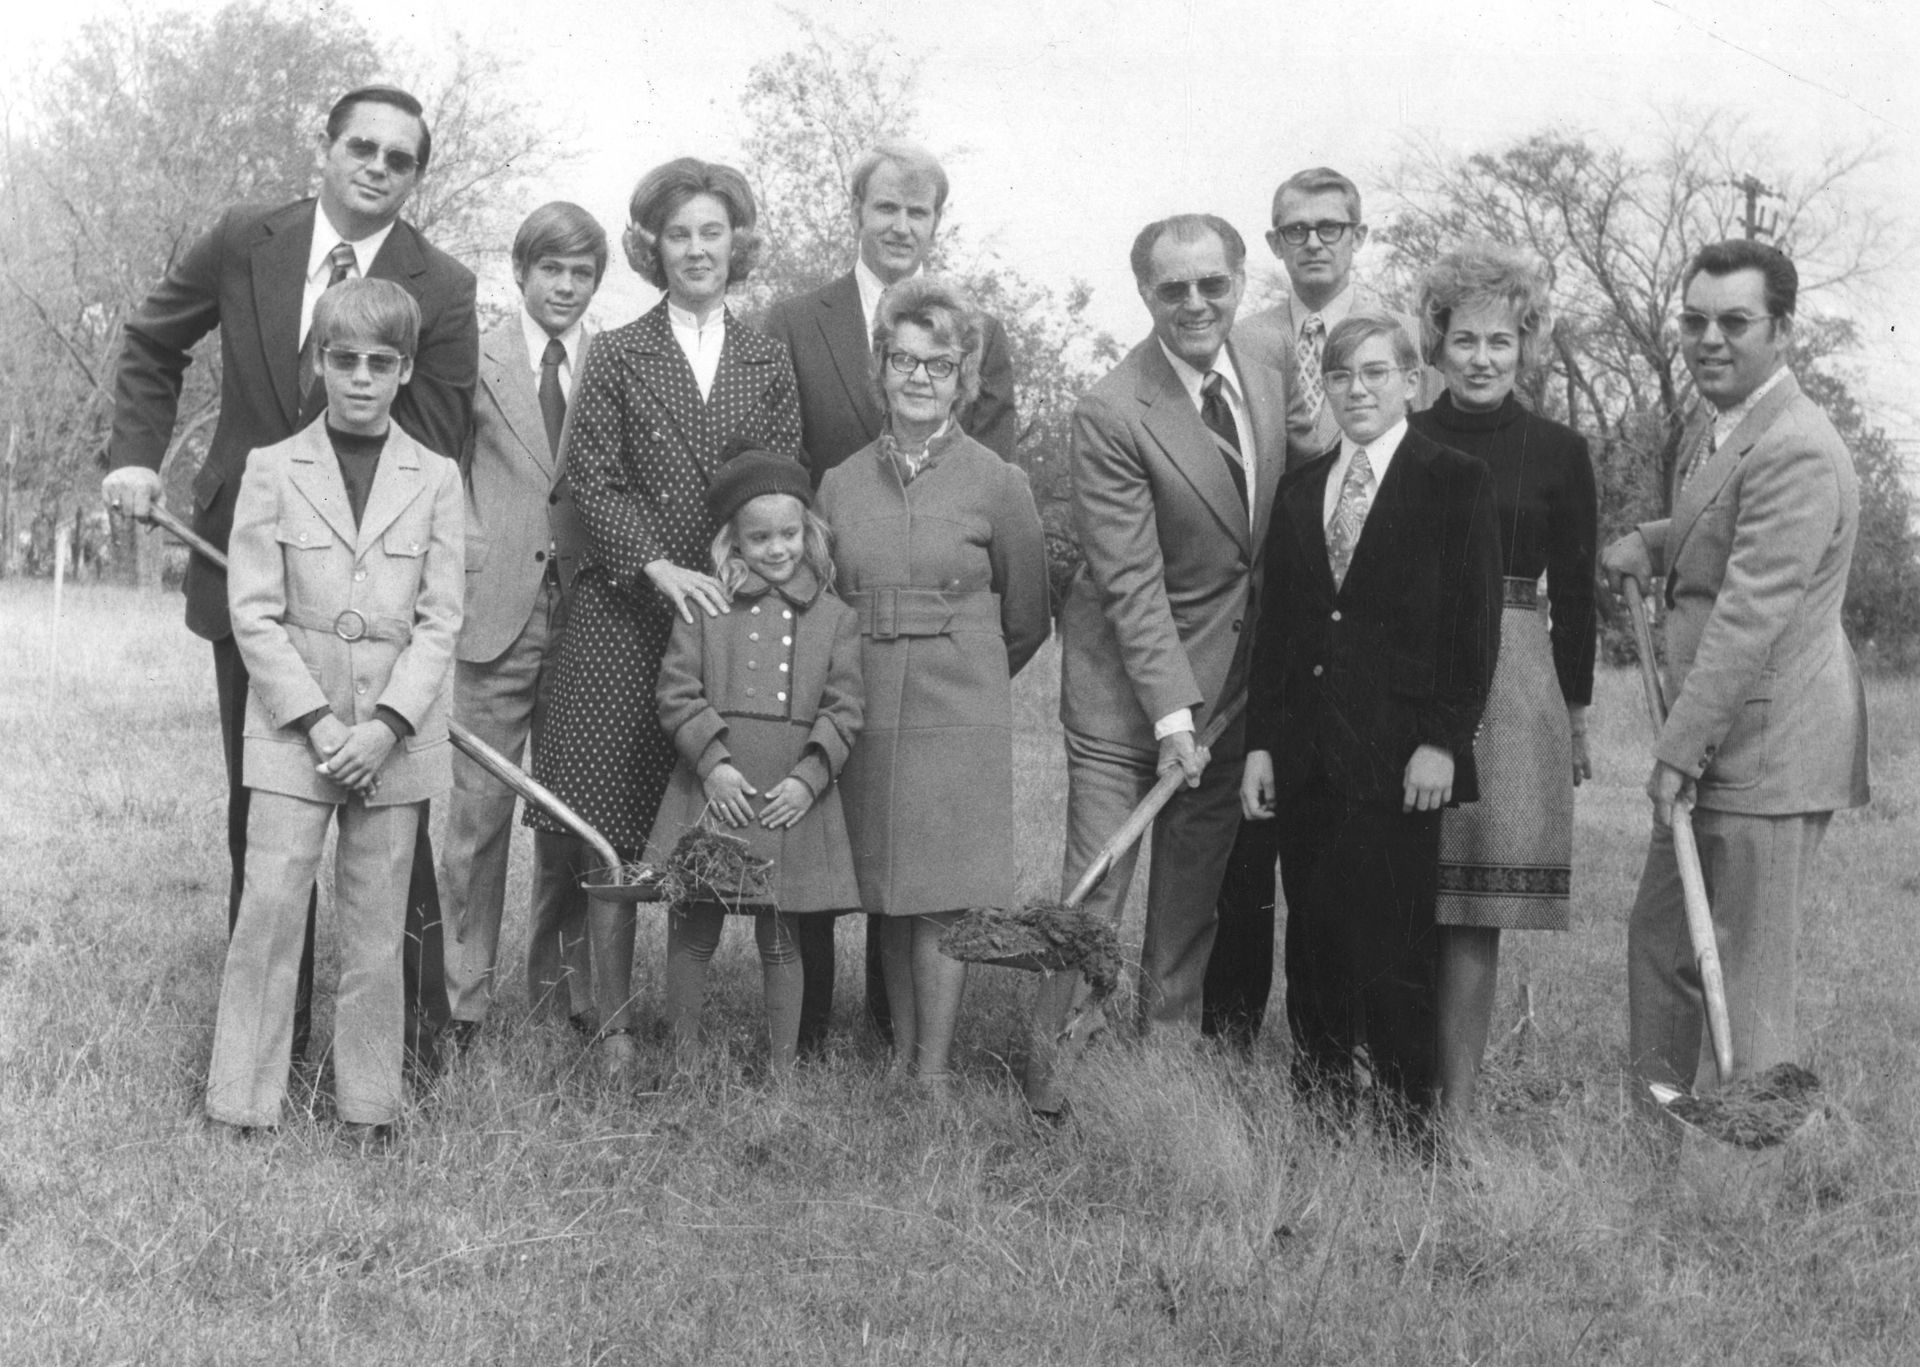 A group of people standing in a field holding shovels